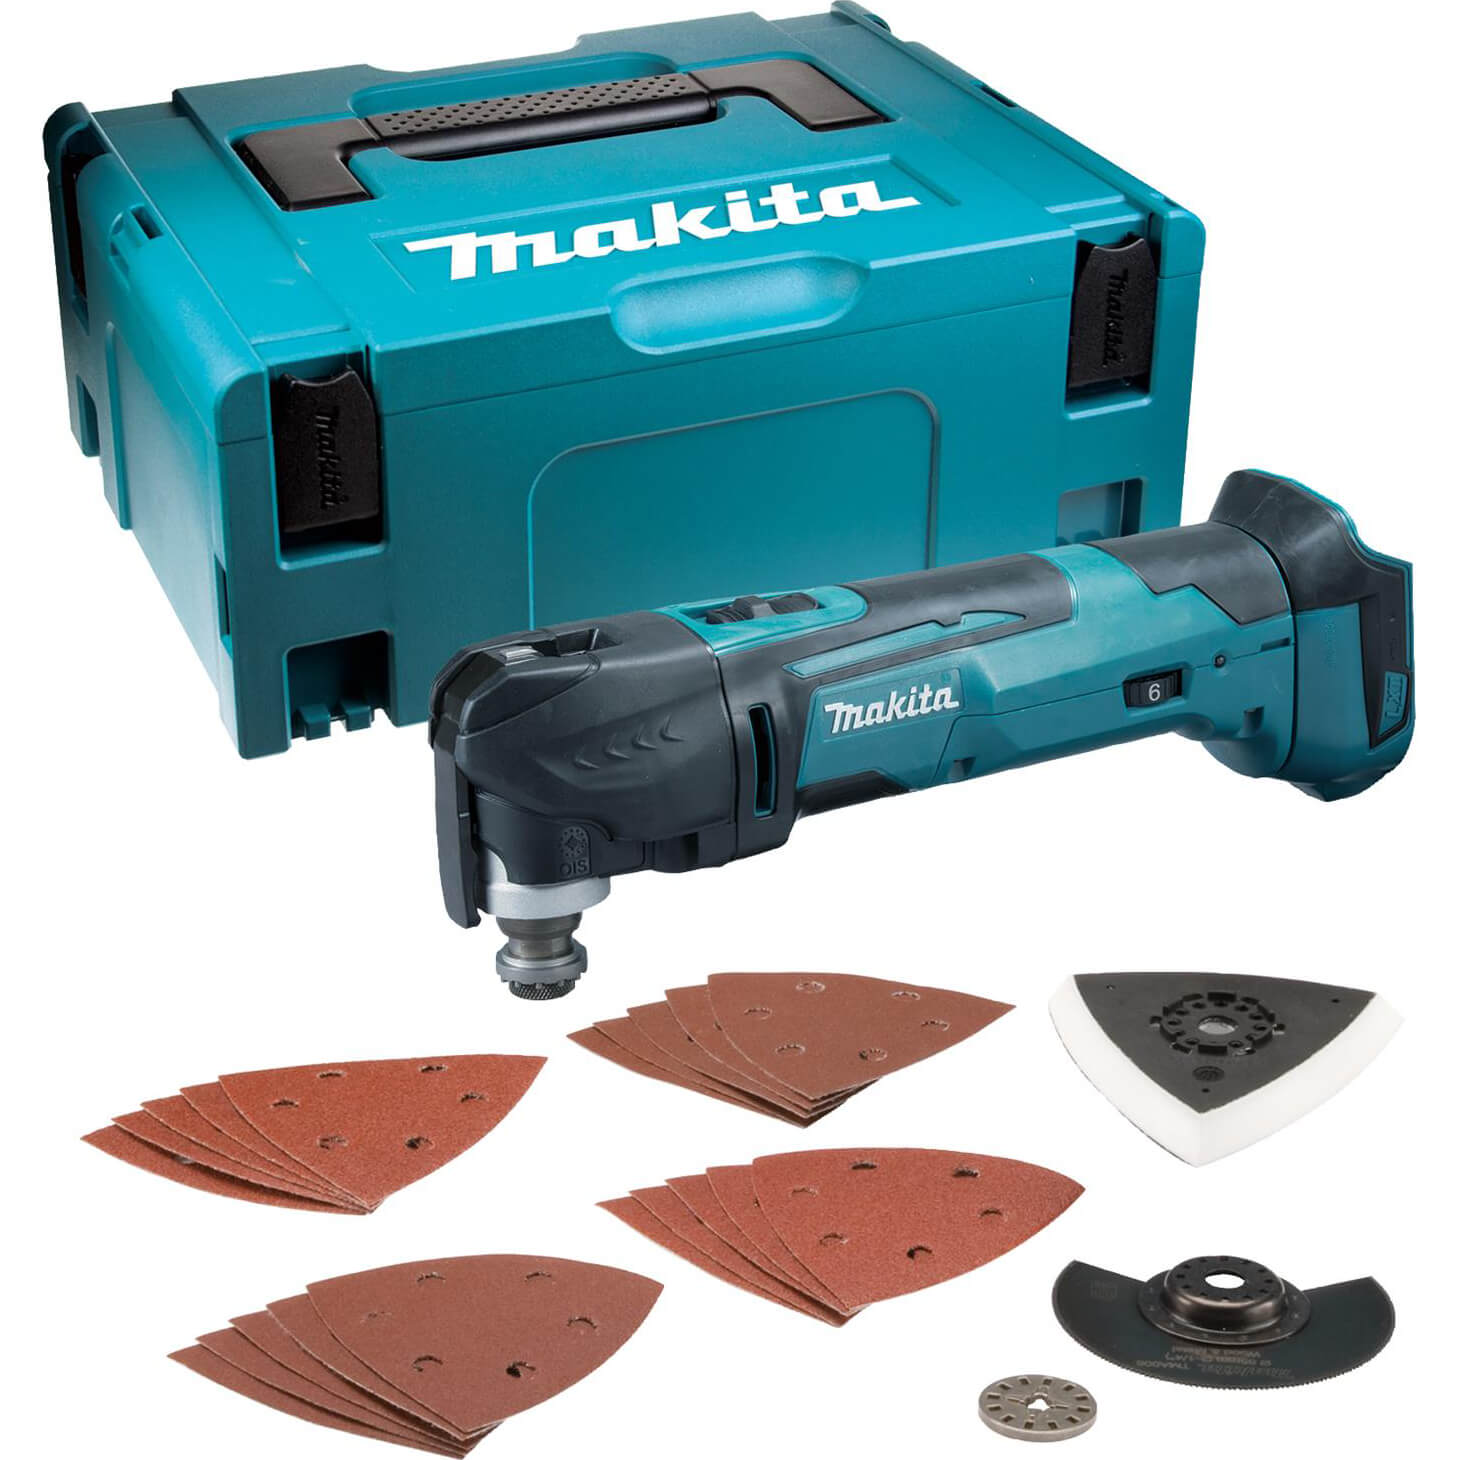 Photo of Makita Dtm51 18v Cordless Lxt Oscillating Multi Tool No Batteries No Charger Case & Accessories